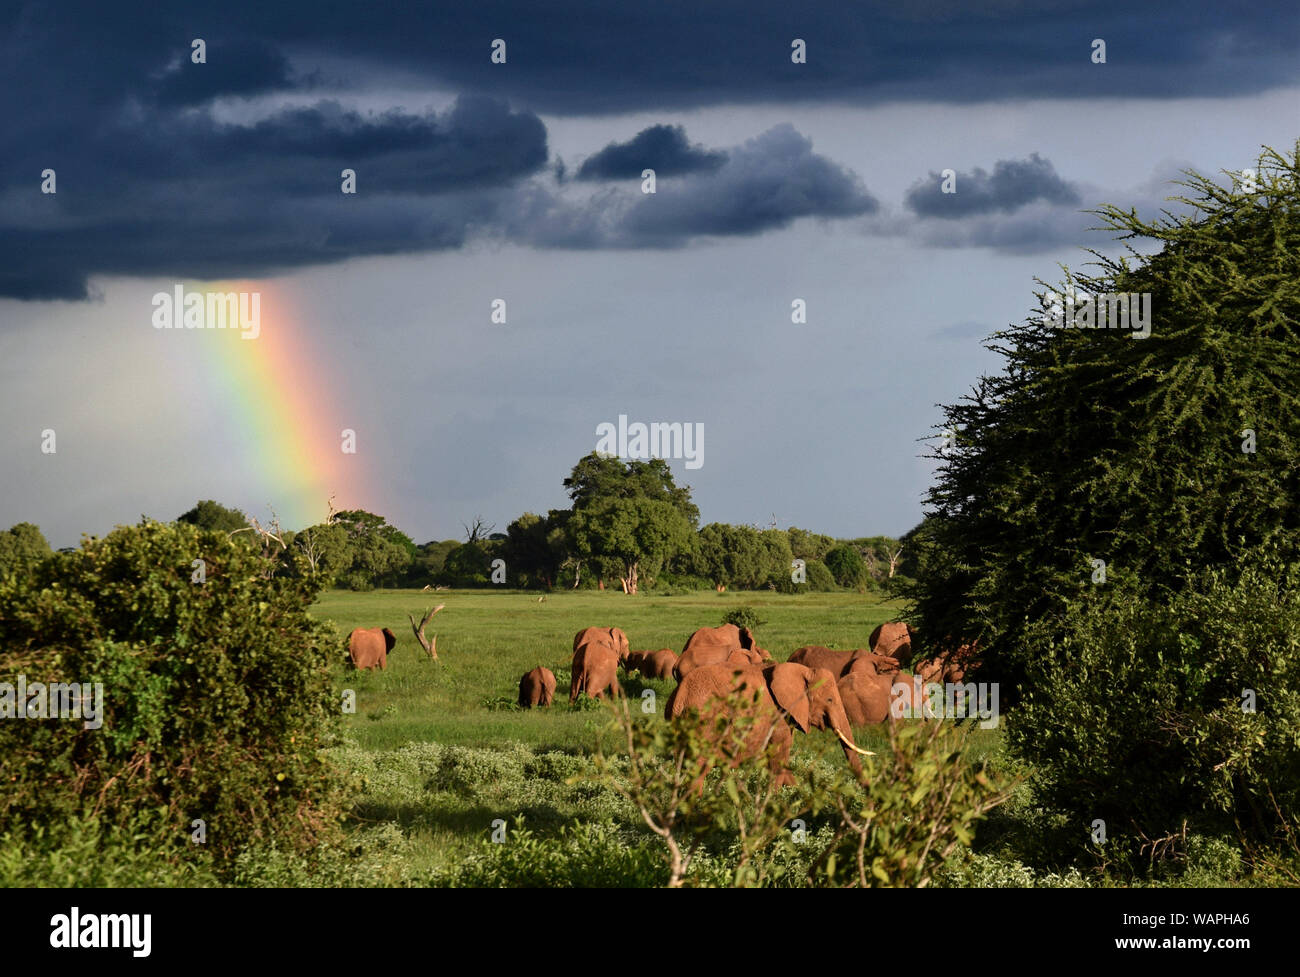 Lanscape after storm on savanna, African red elephants under rainbow, big stormy clouds Stock Photo